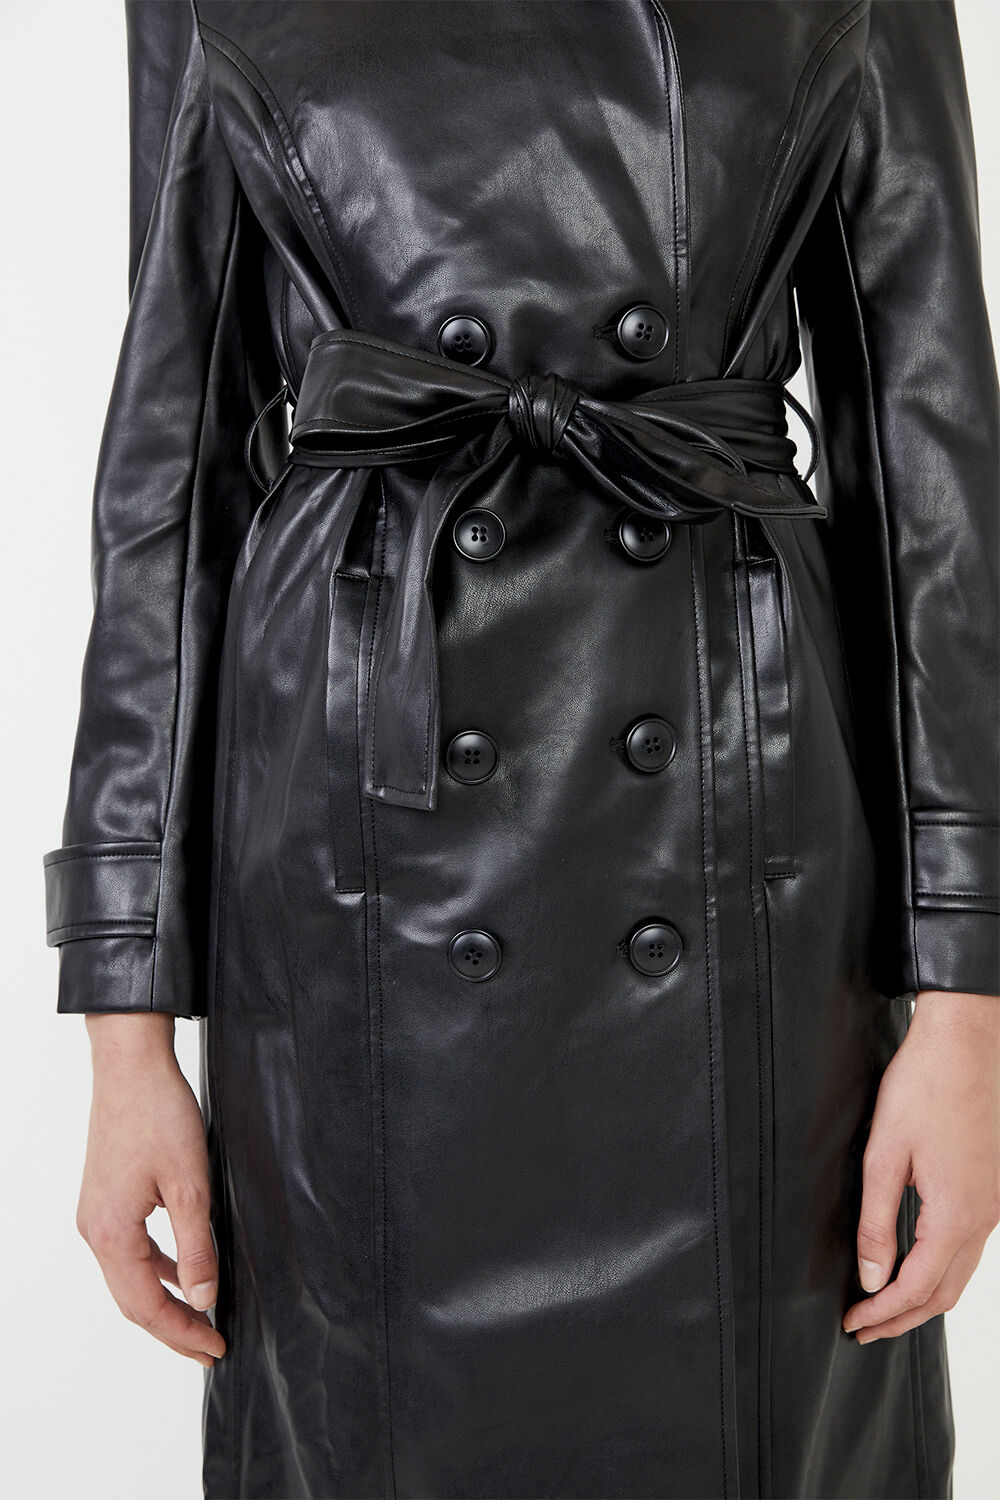 VEGAN LEATHER TRENCH COAT in colour CAVIAR